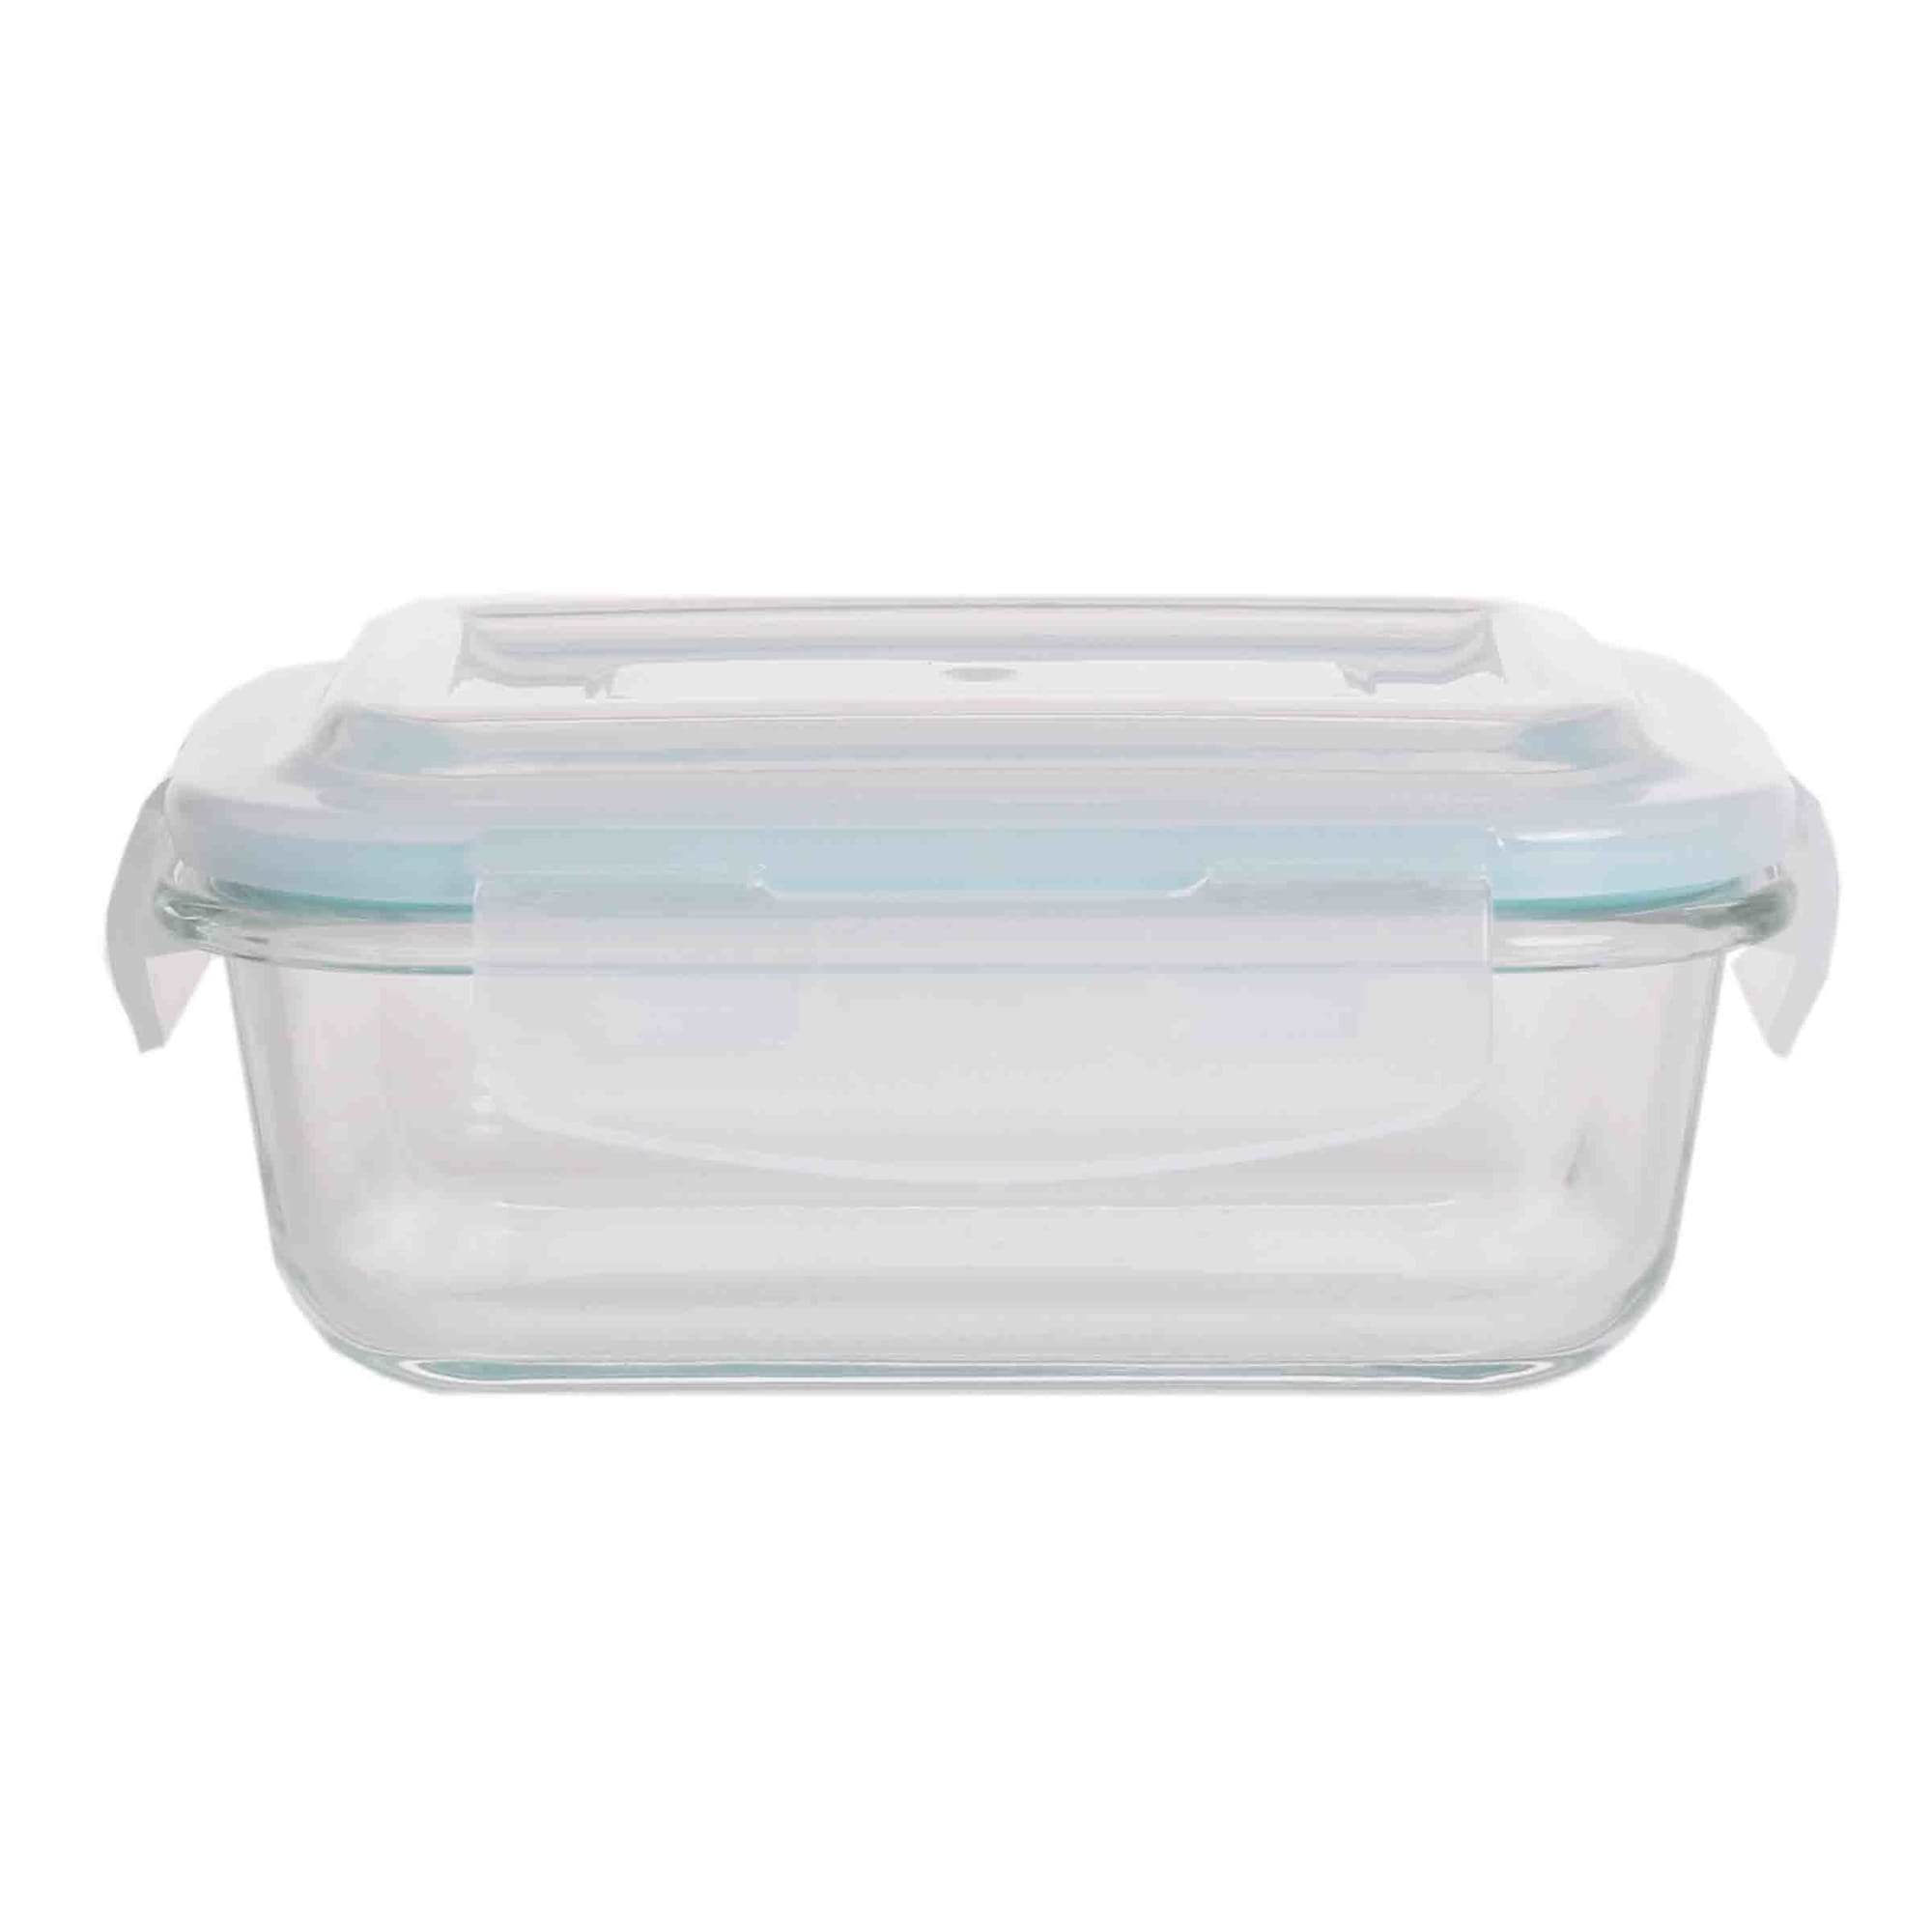 Home Basics 20 oz. Rectangular Borosilicate Glass Food Storage Container $4.00 EACH, CASE PACK OF 12